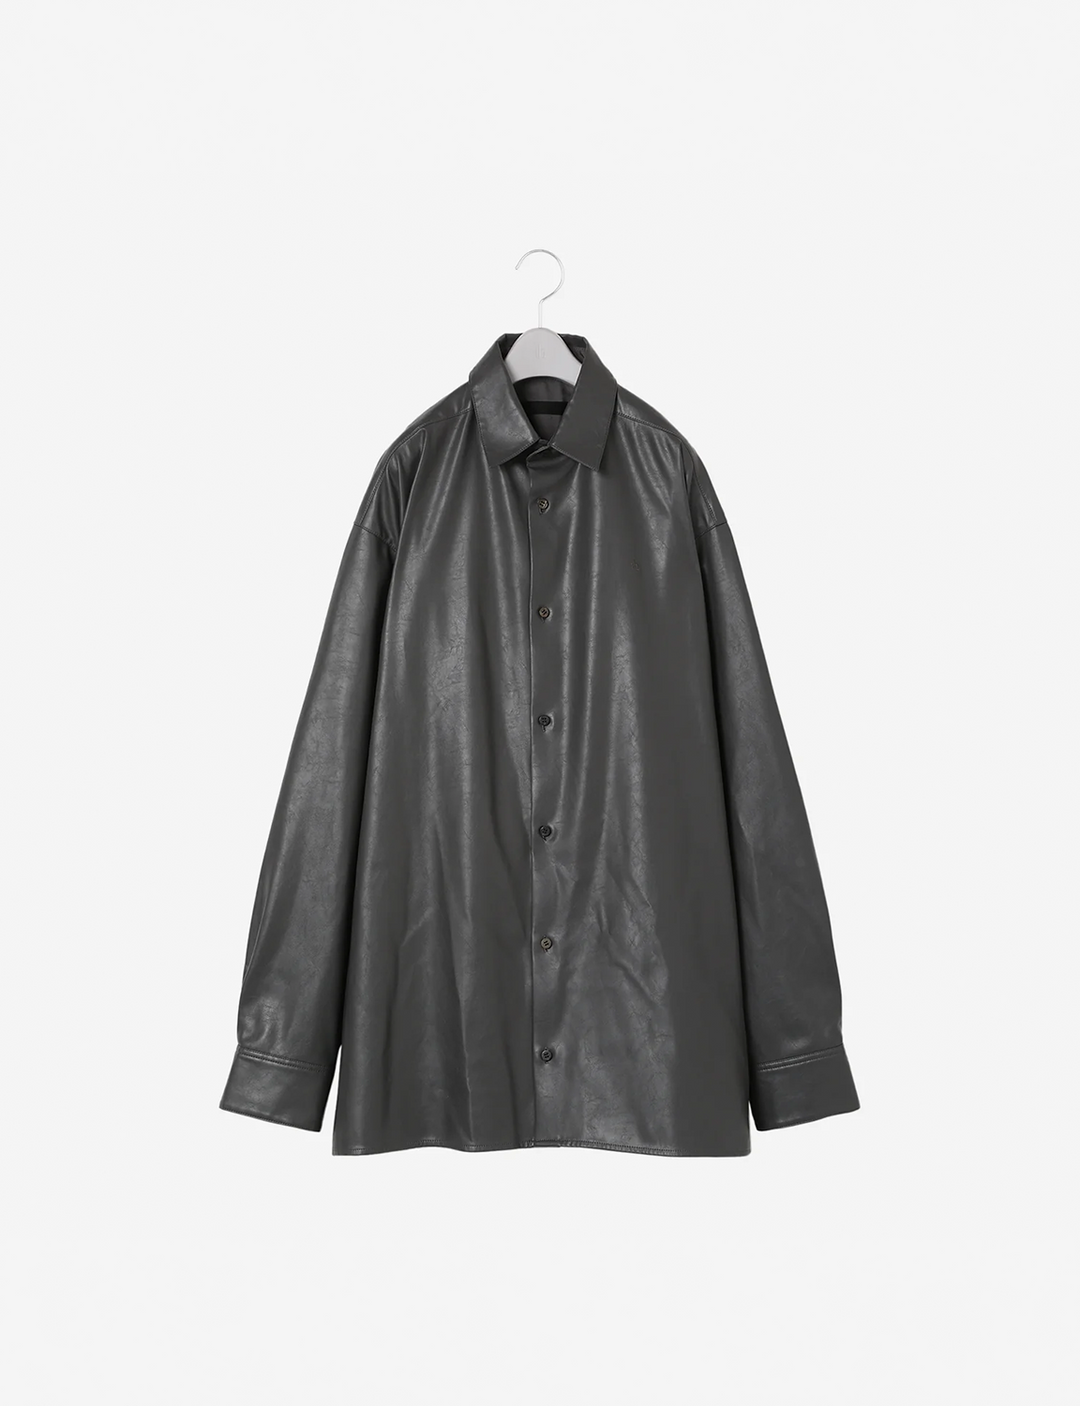 th products - Synthetic Leather Oversized Shirt / gray – The ...